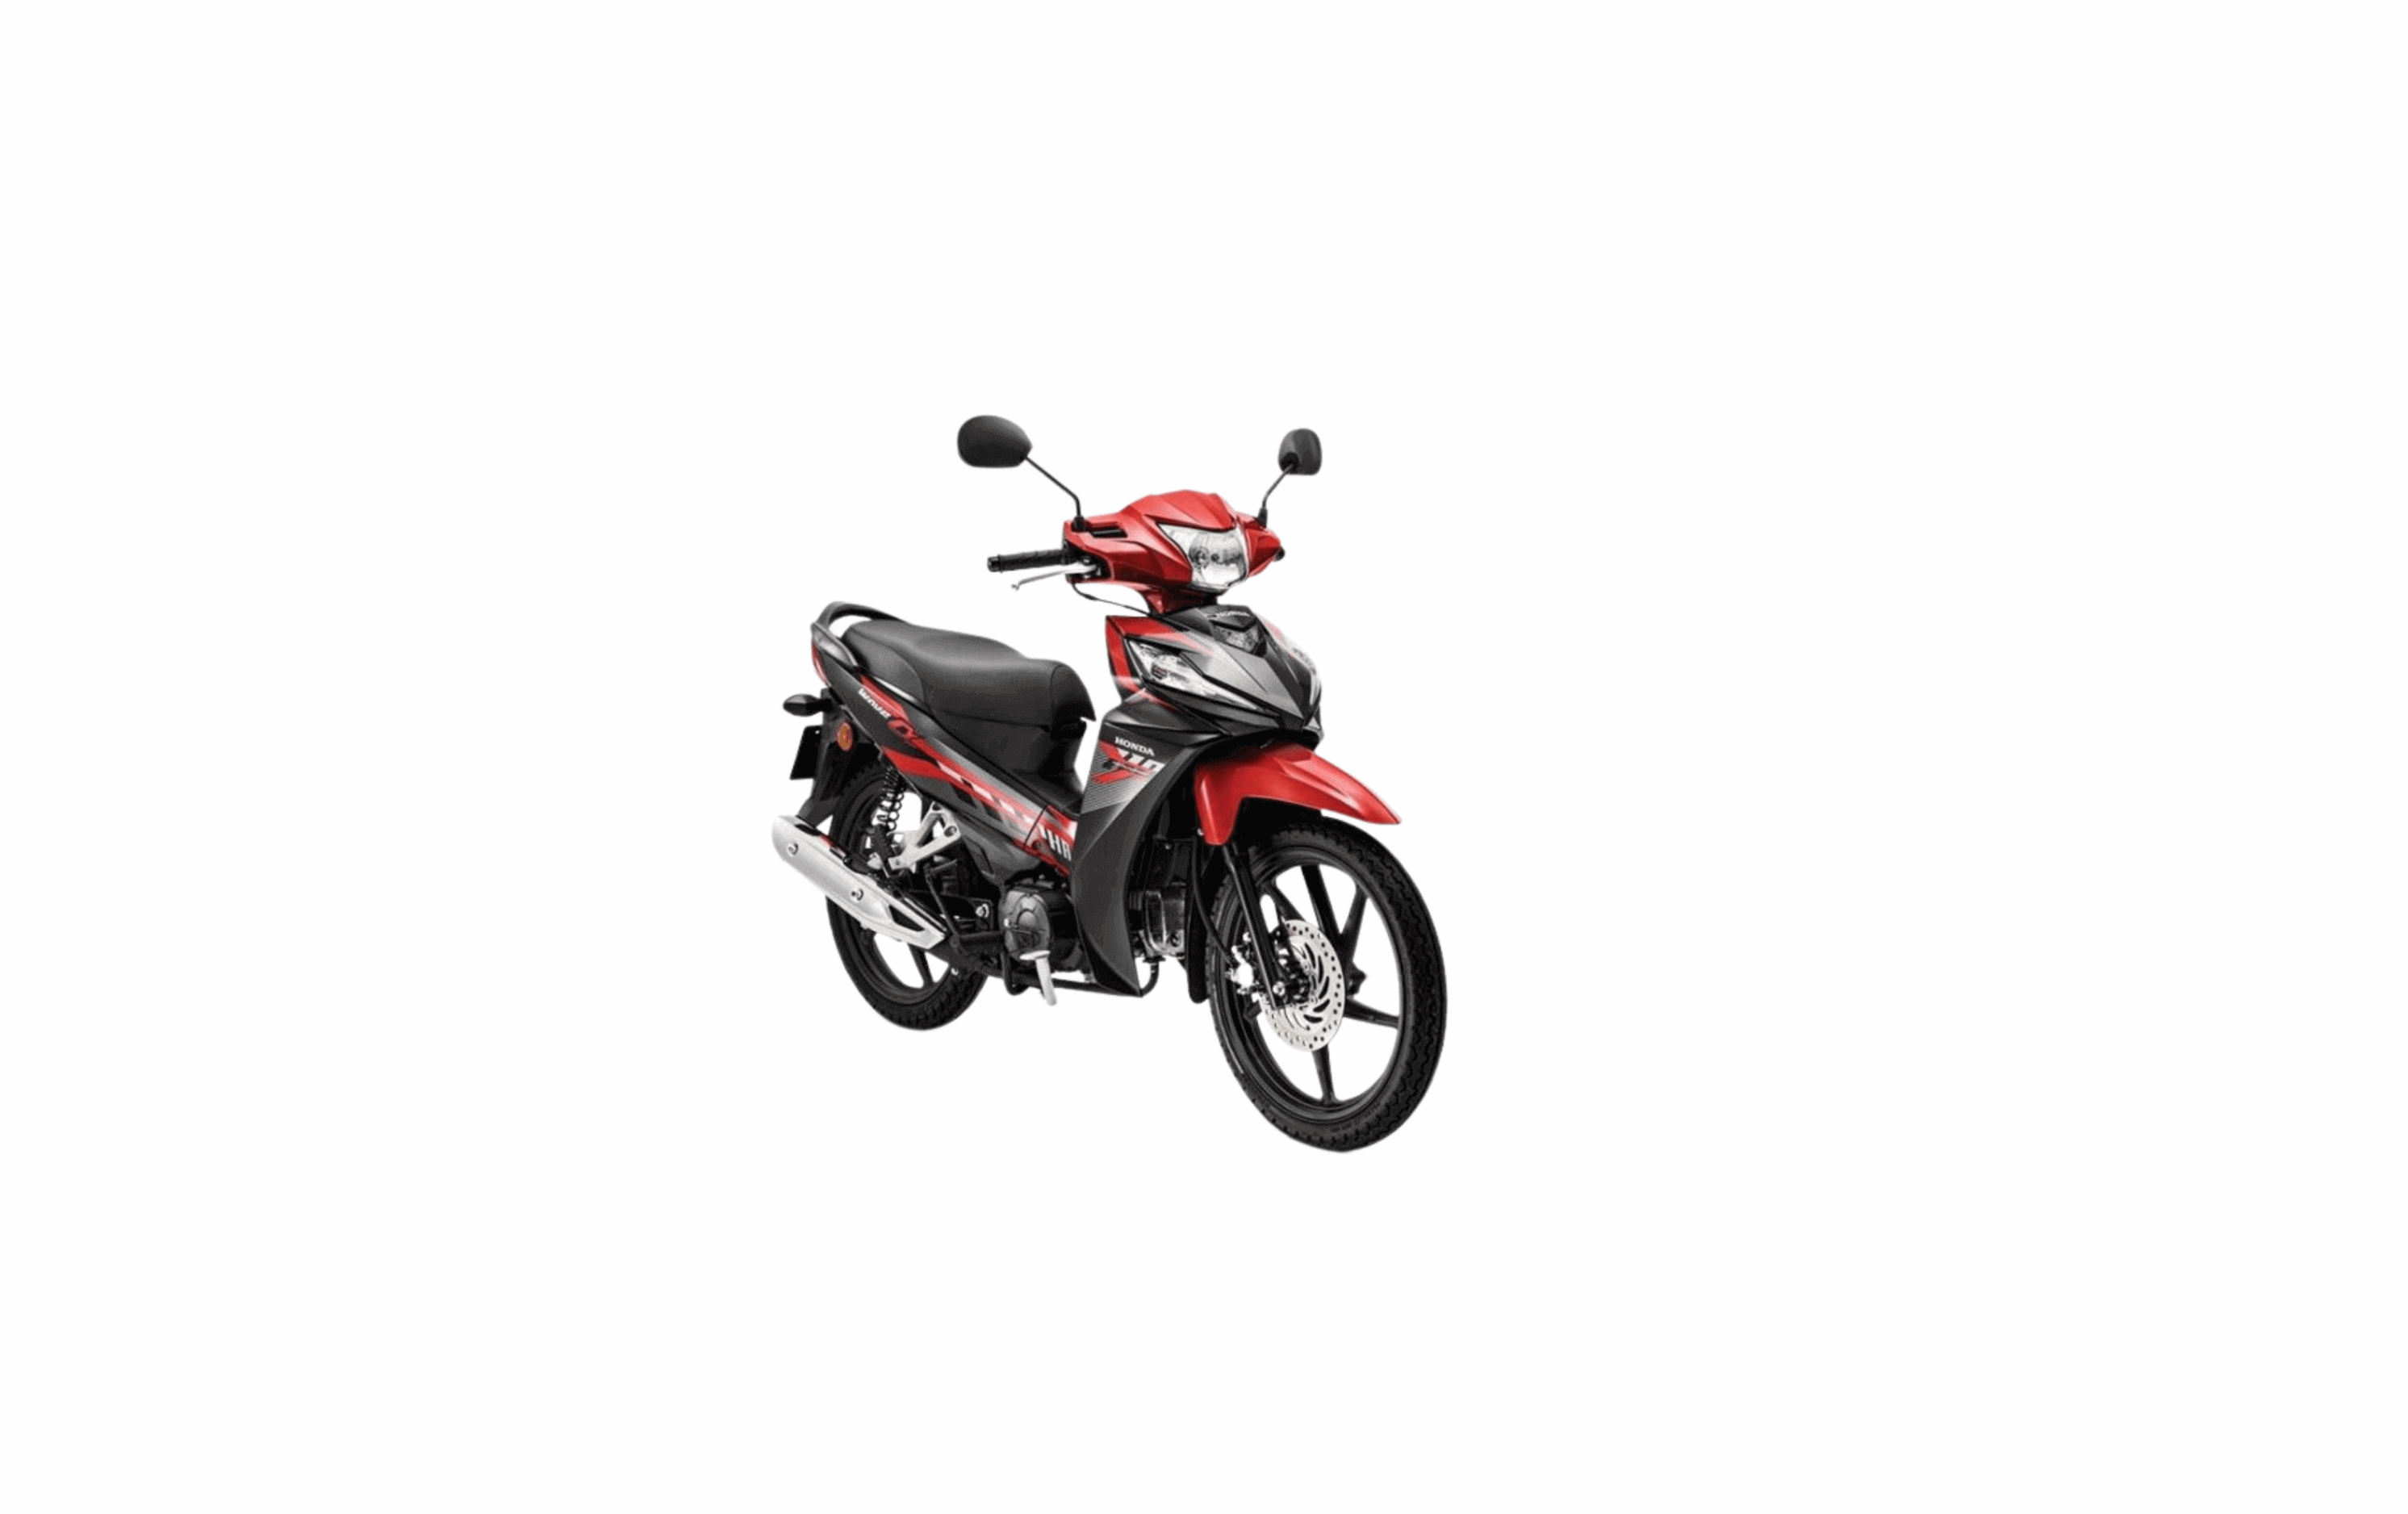 2018 Honda Wave 110 R Specs Features Price Review